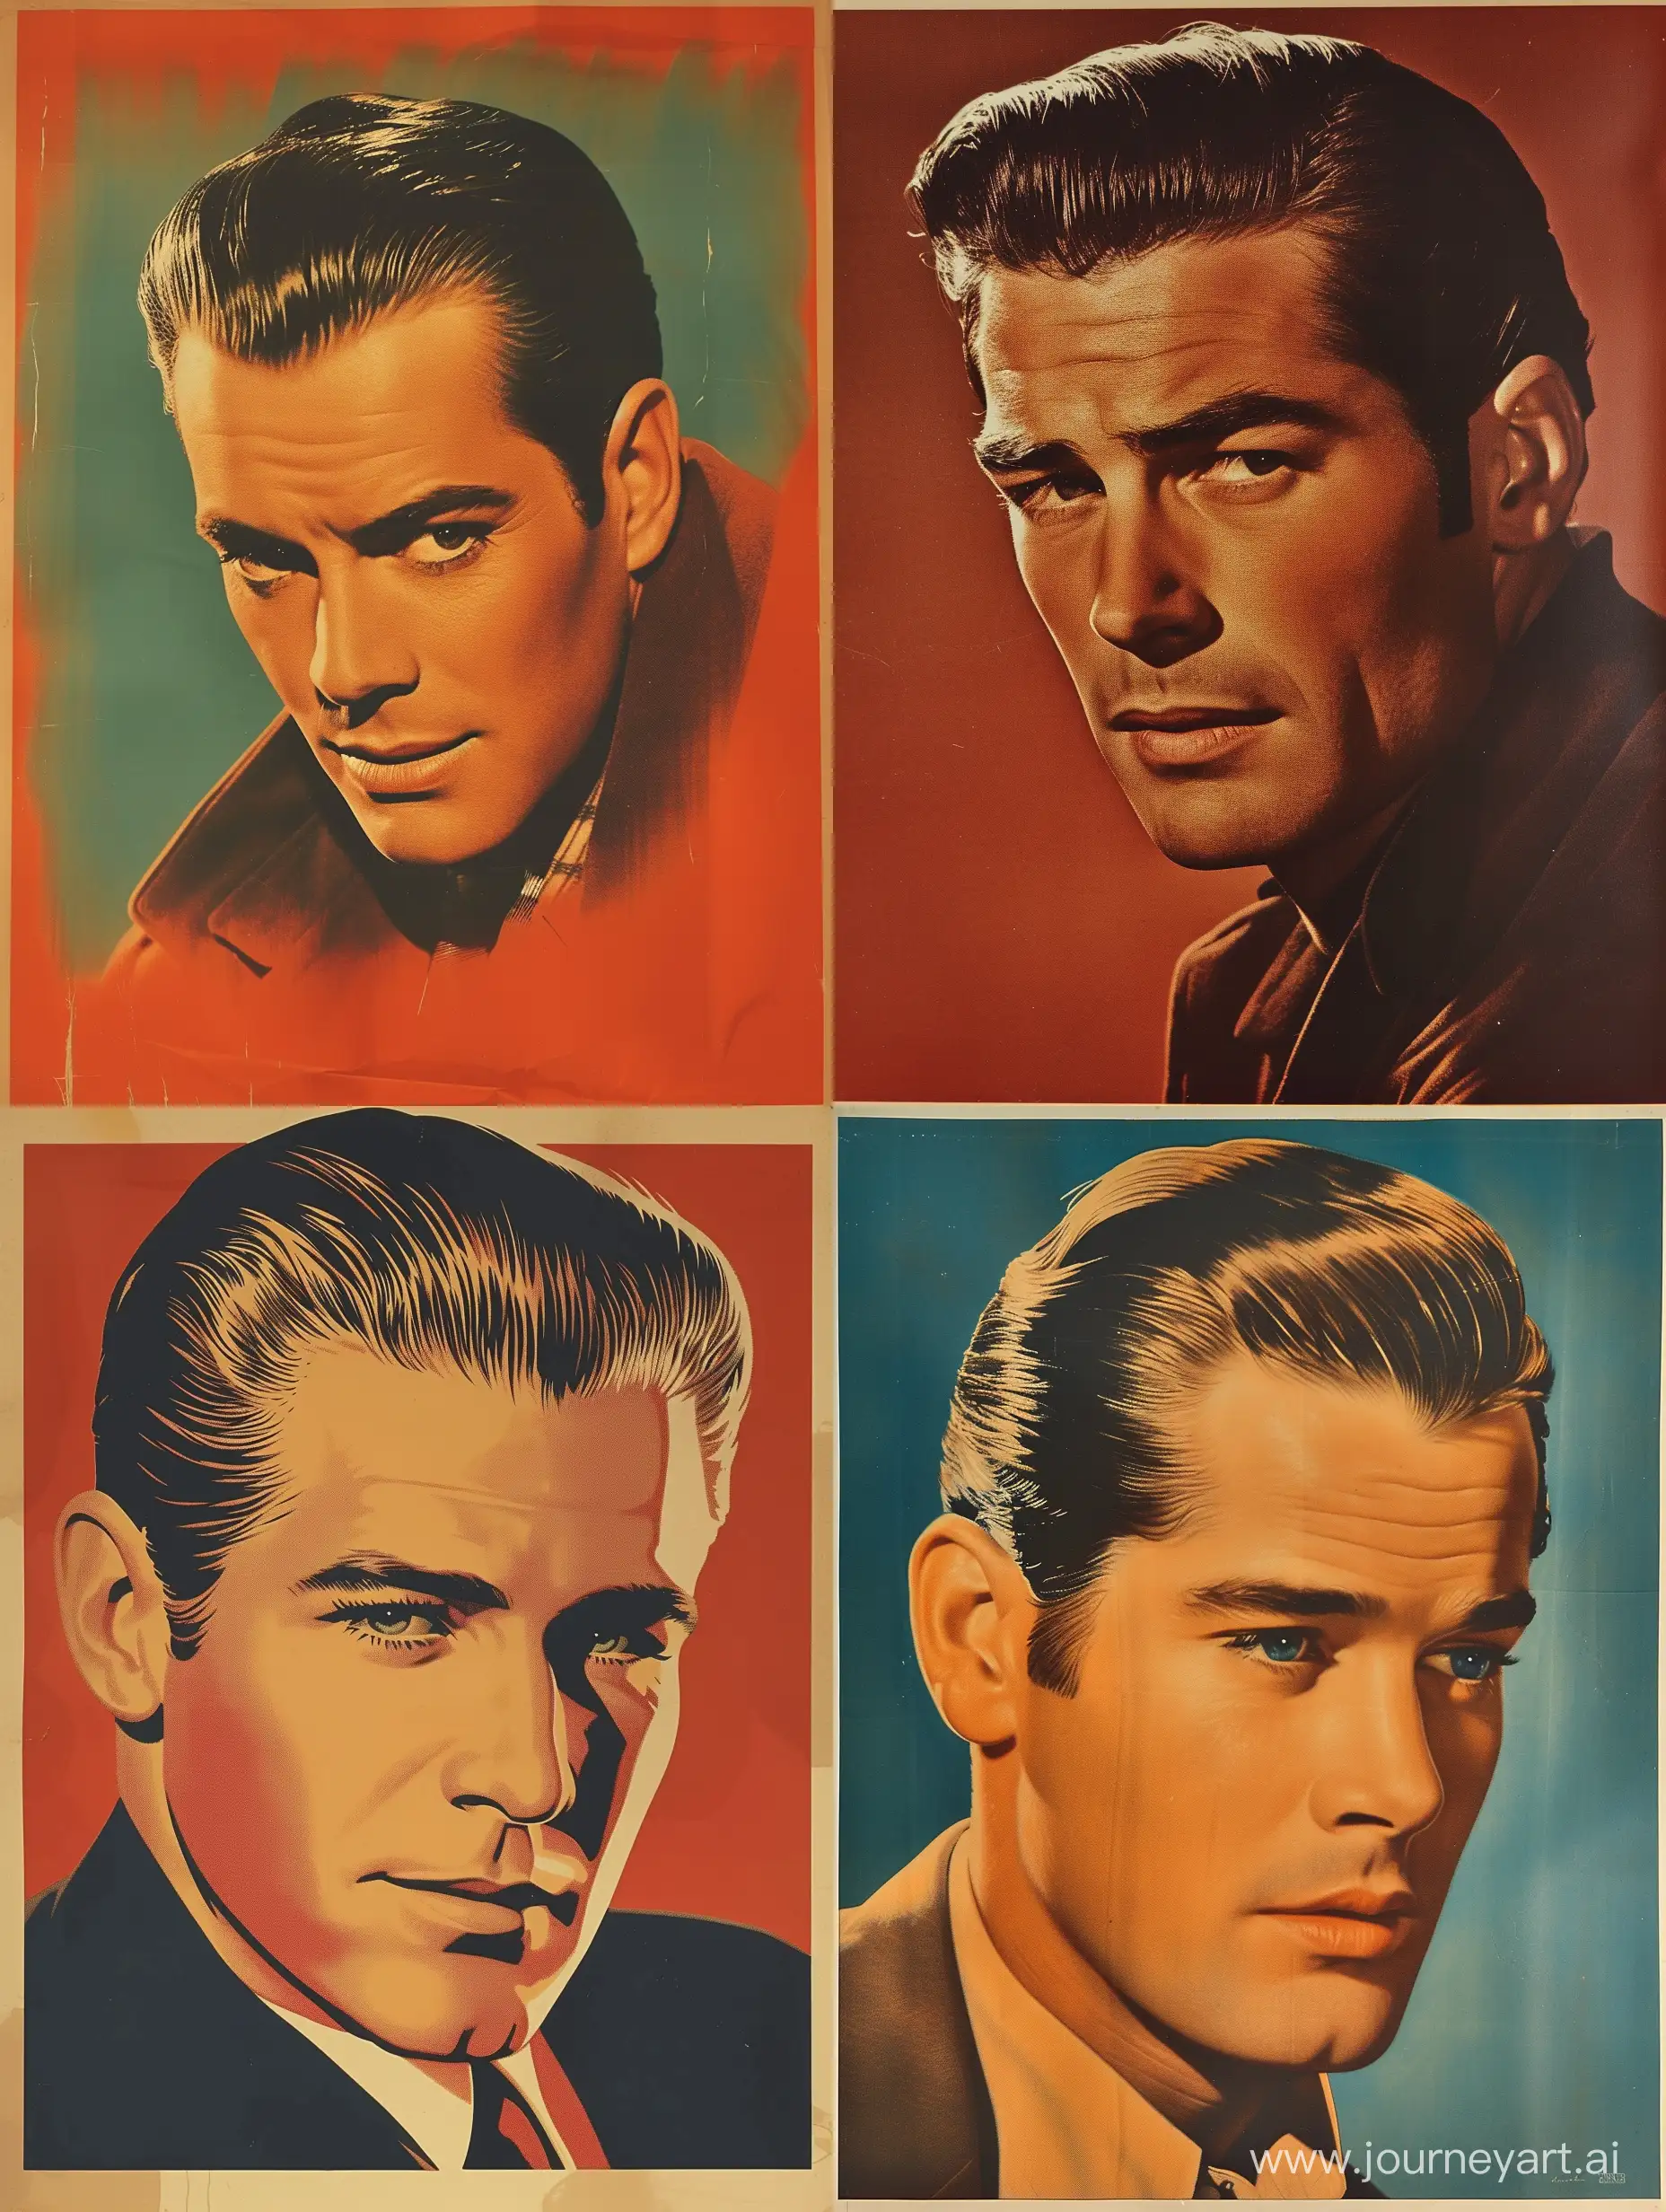 Handsome-1940s-Actor-Man-in-Vintage-Pulp-Style-Poster